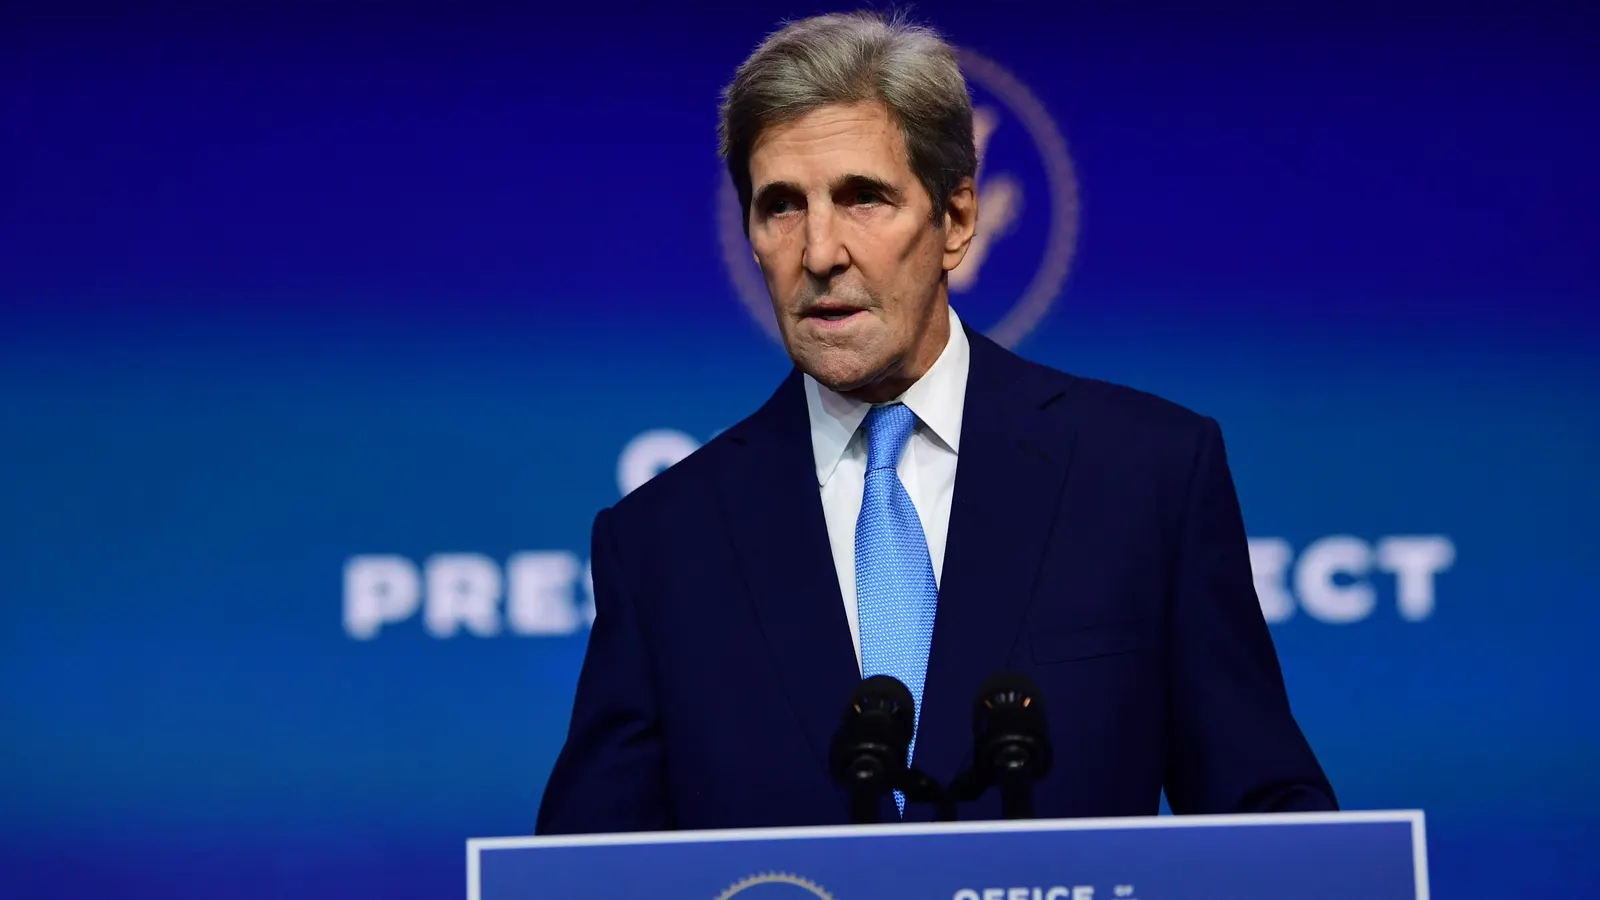 Kerry's legacy includes revitalizing the U.S.-China climate relationship (Credits: Forbes)